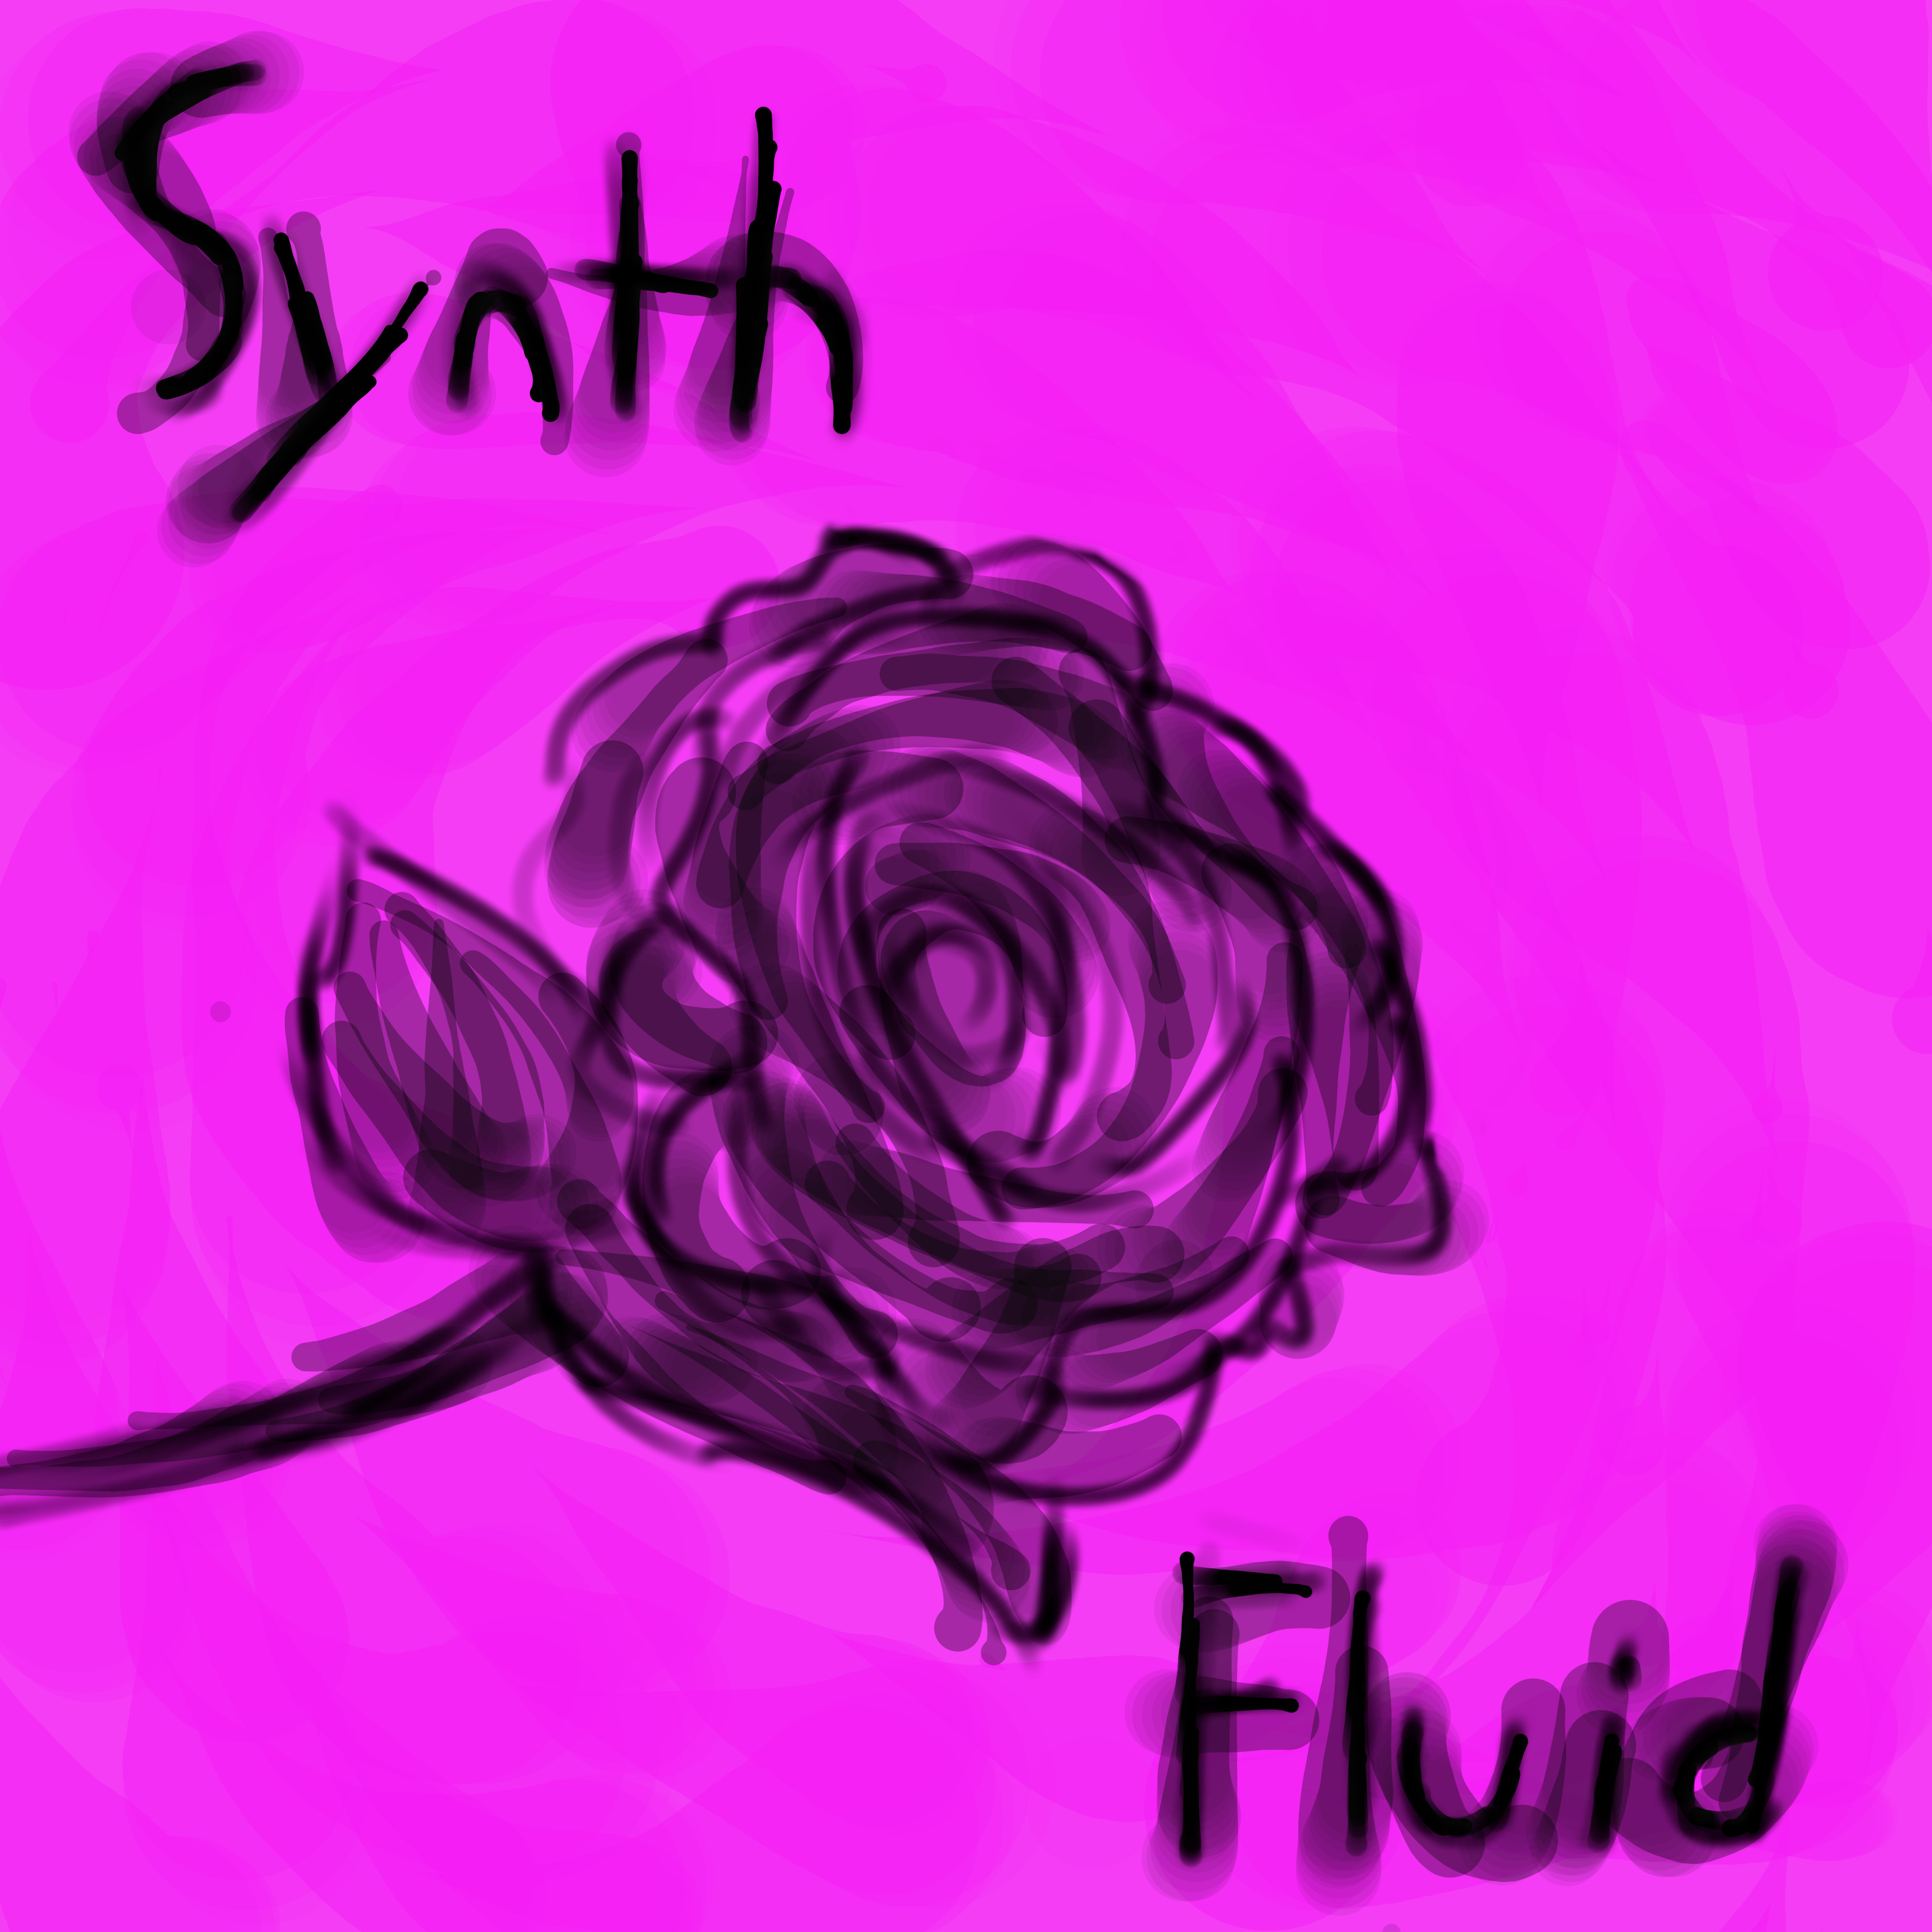 A digitally sketched and inked black rose, in between the text, "Synth Fluid." The background is a digitally painted pink.